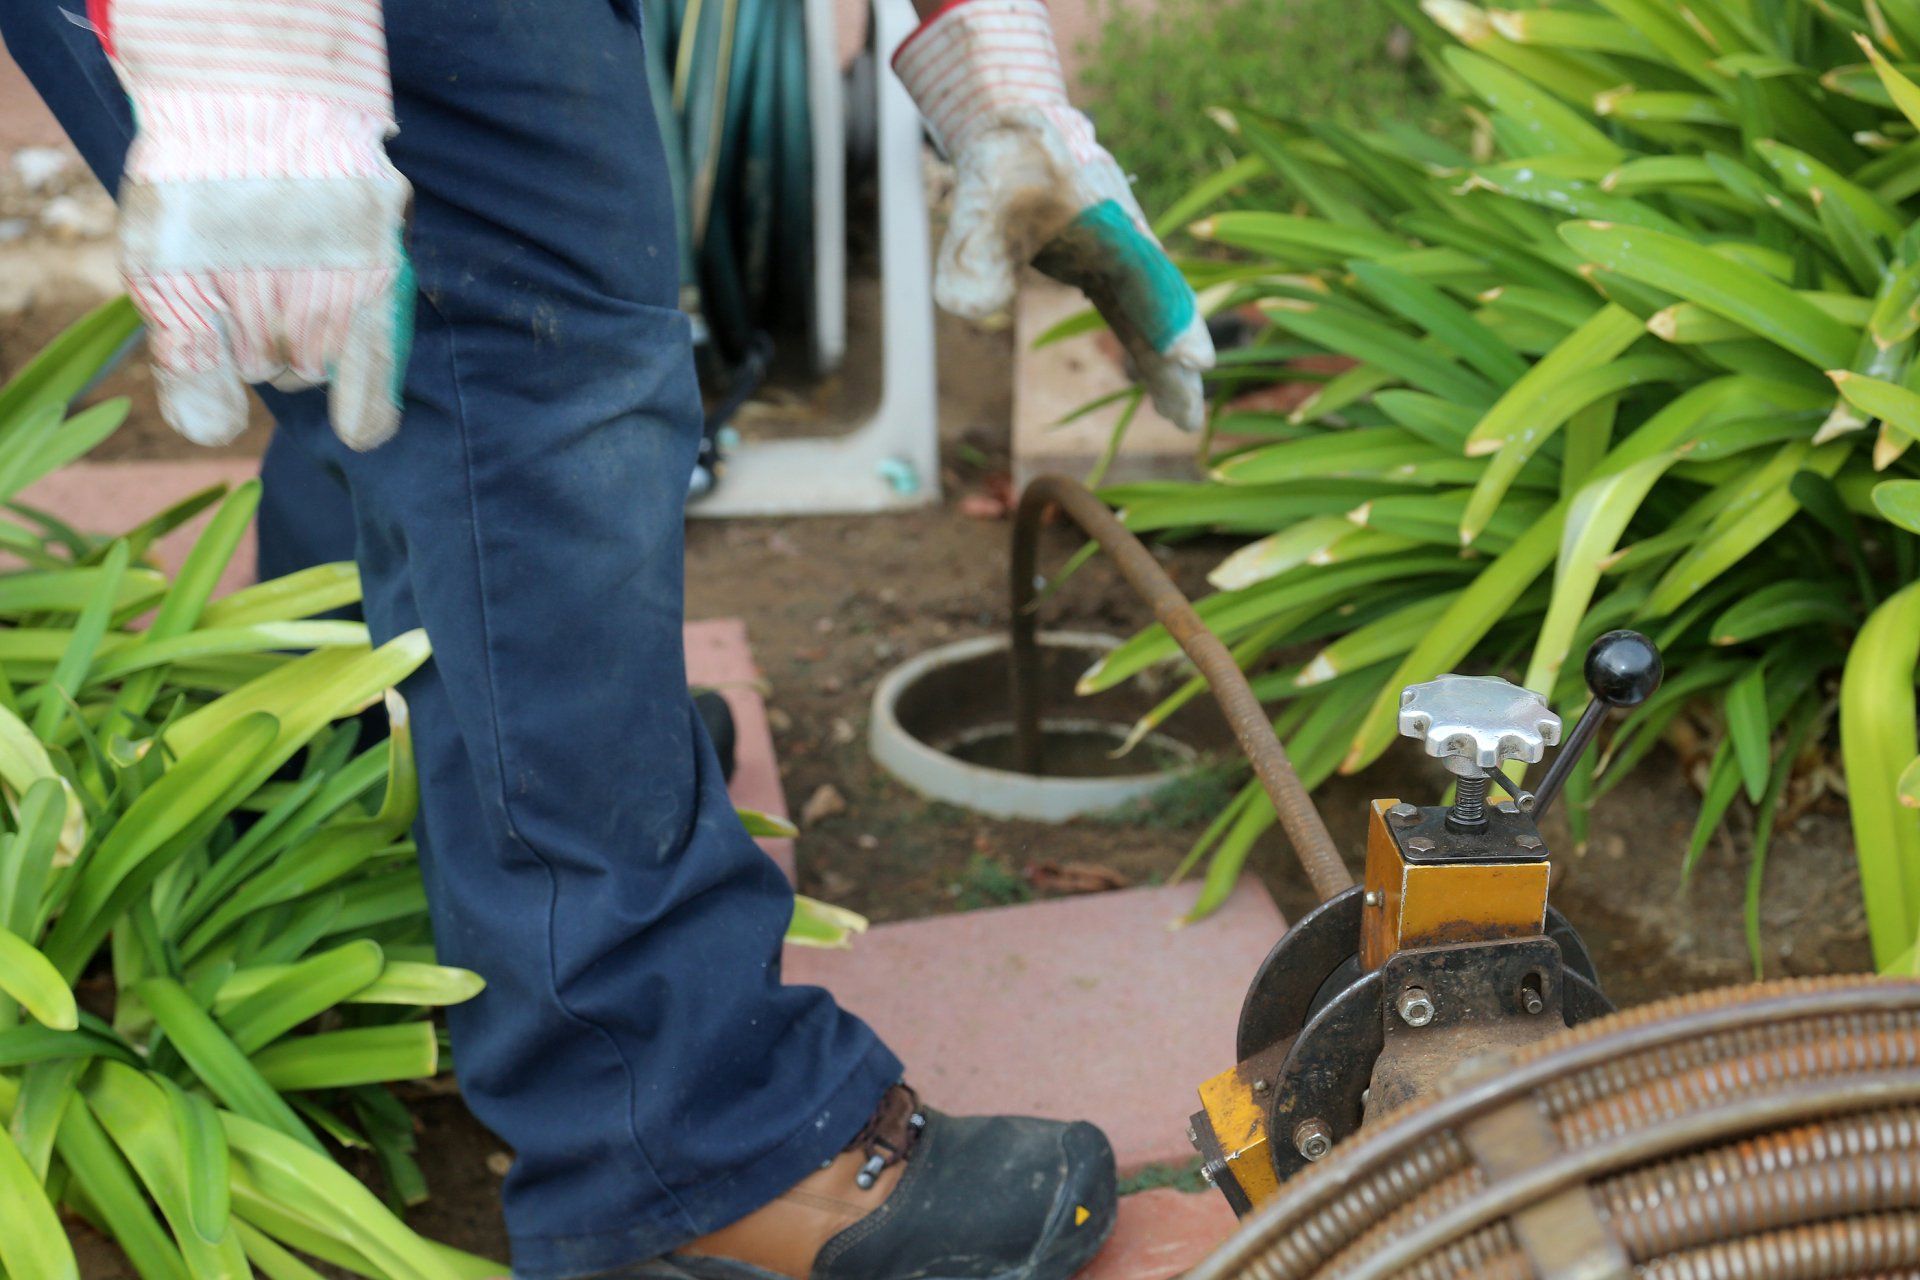 How Can I Tell If My Sewer Line is Clogged?